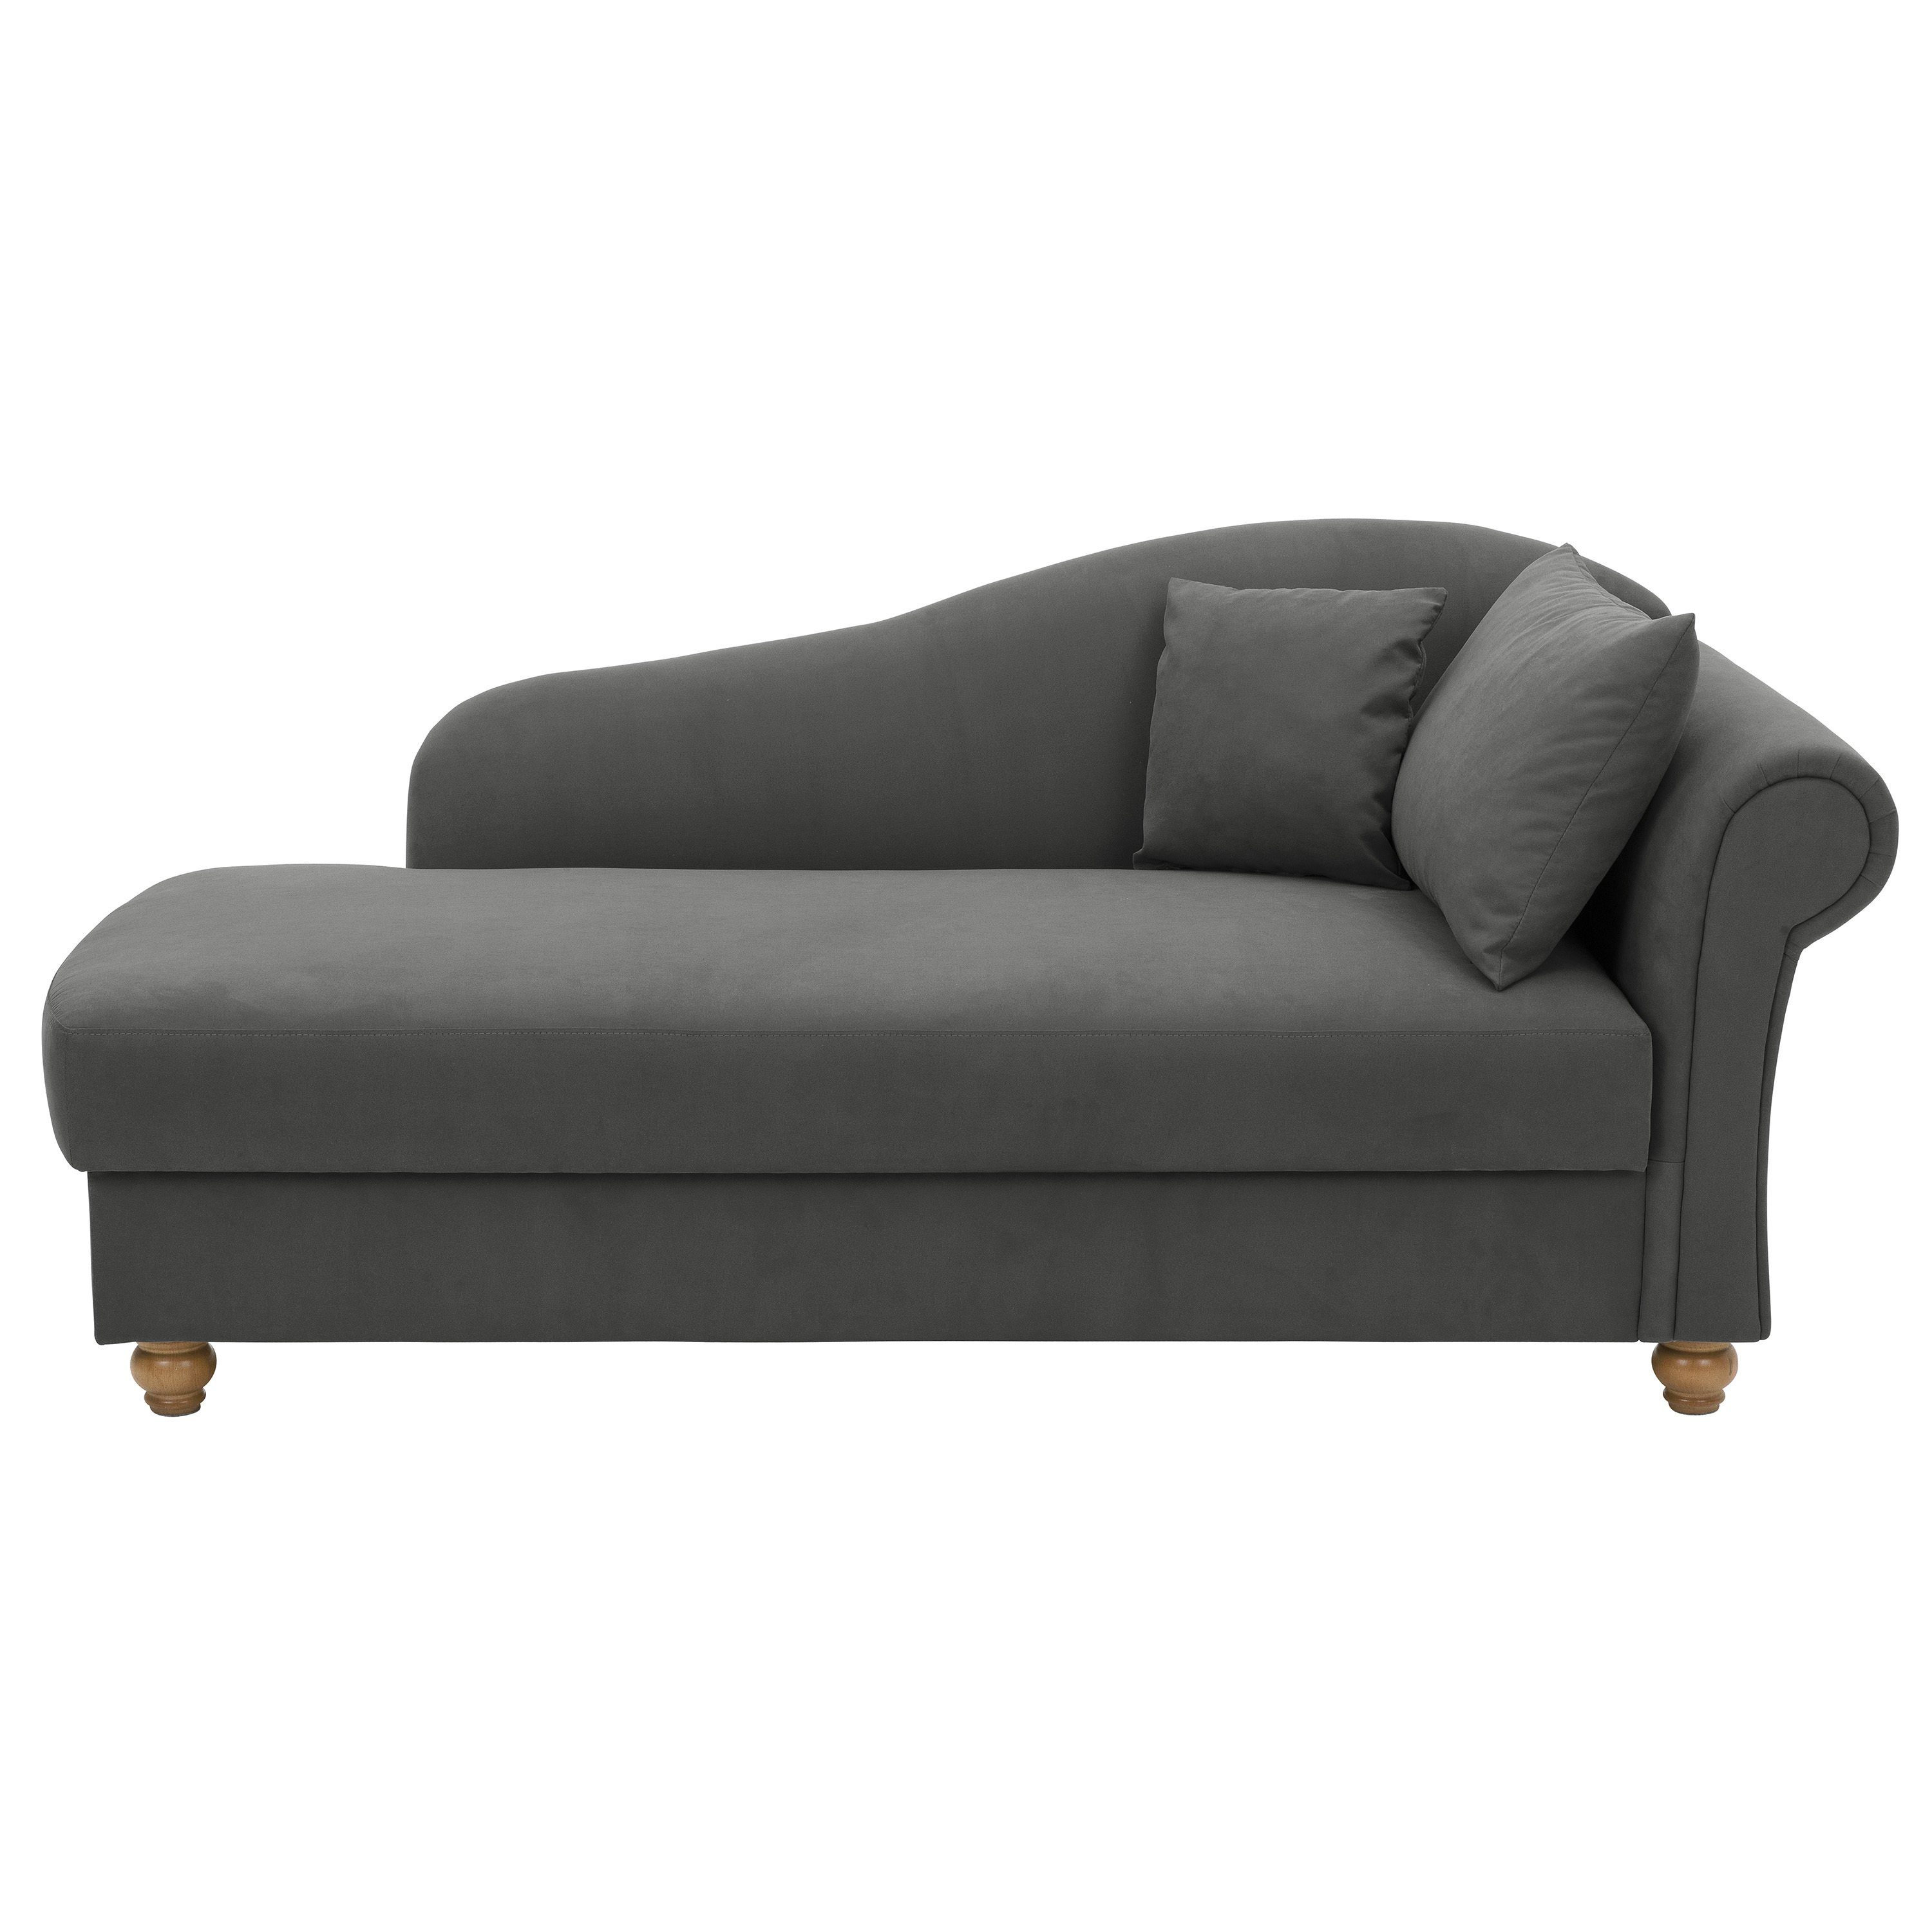 Armlehne Recamiere Winzer® Sofa Evelyn, rechts Max